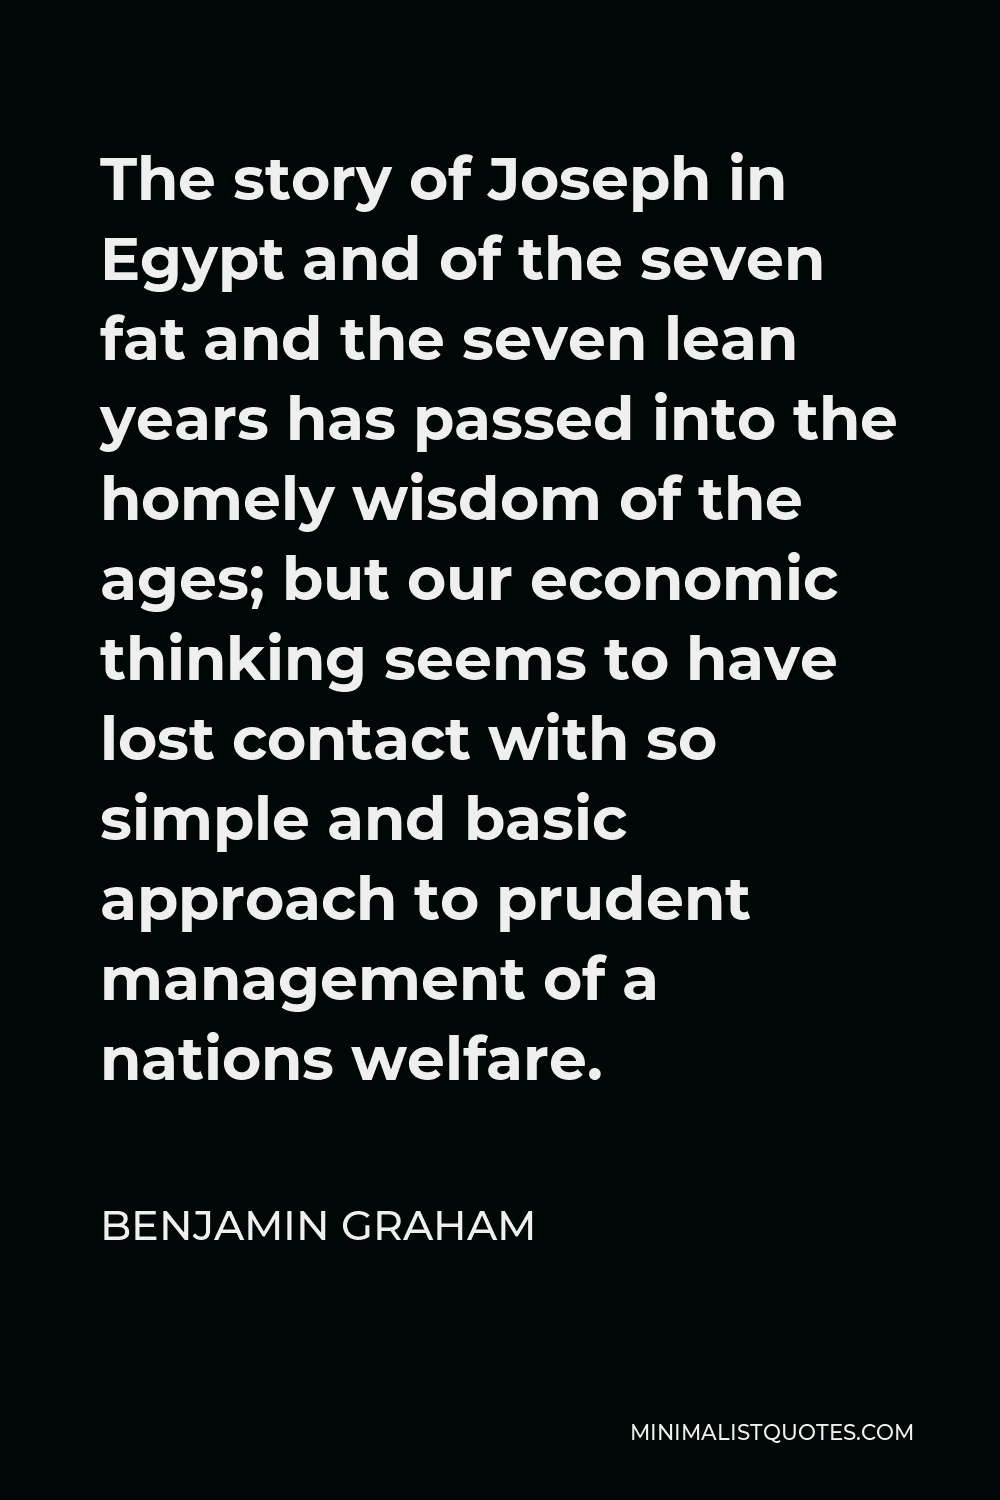 Benjamin Graham Quote - The story of Joseph in Egypt and of the seven fat and the seven lean years has passed into the homely wisdom of the ages; but our economic thinking seems to have lost contact with so simple and basic approach to prudent management of a nations welfare.